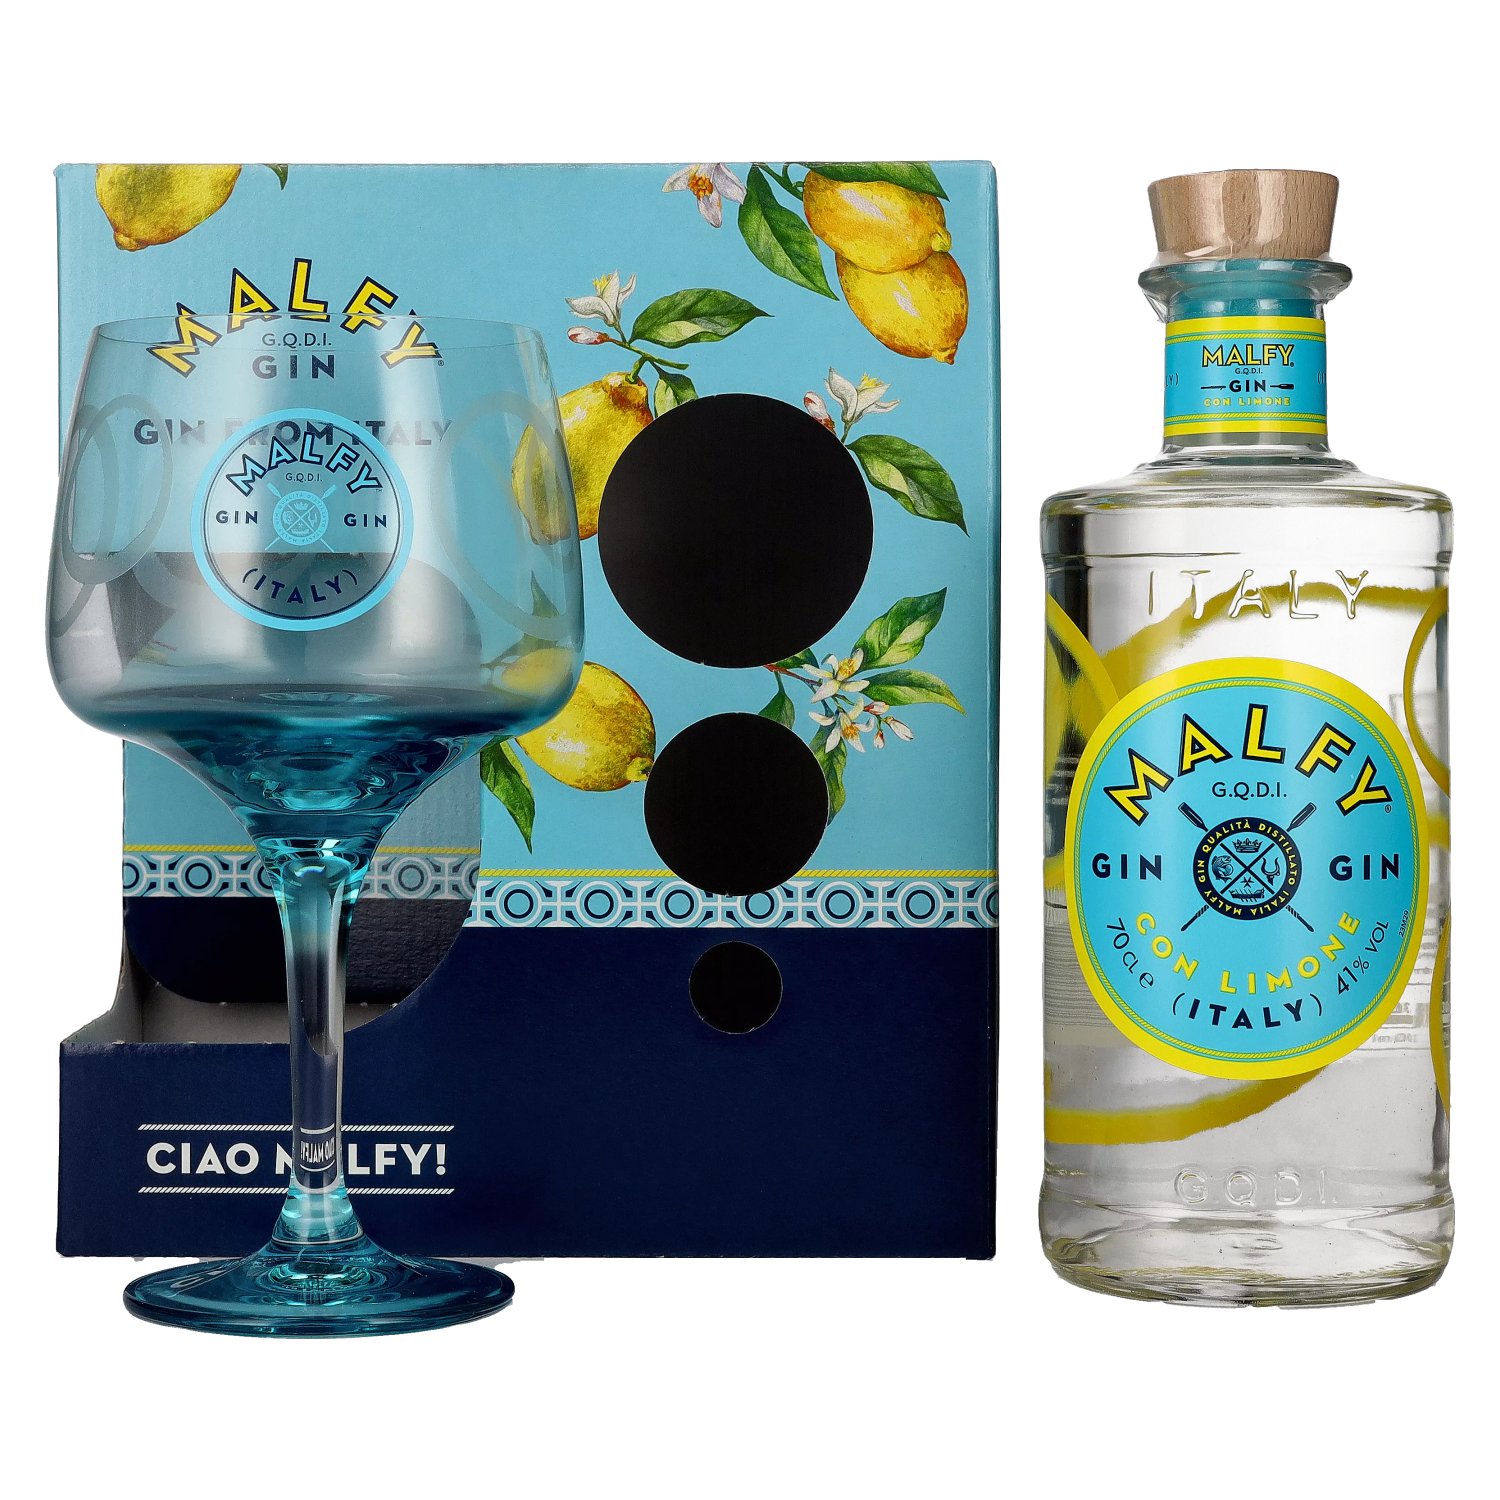 Malfy Gin CON LIMONE 41% Vol. 0,7l in Giftbox with glass